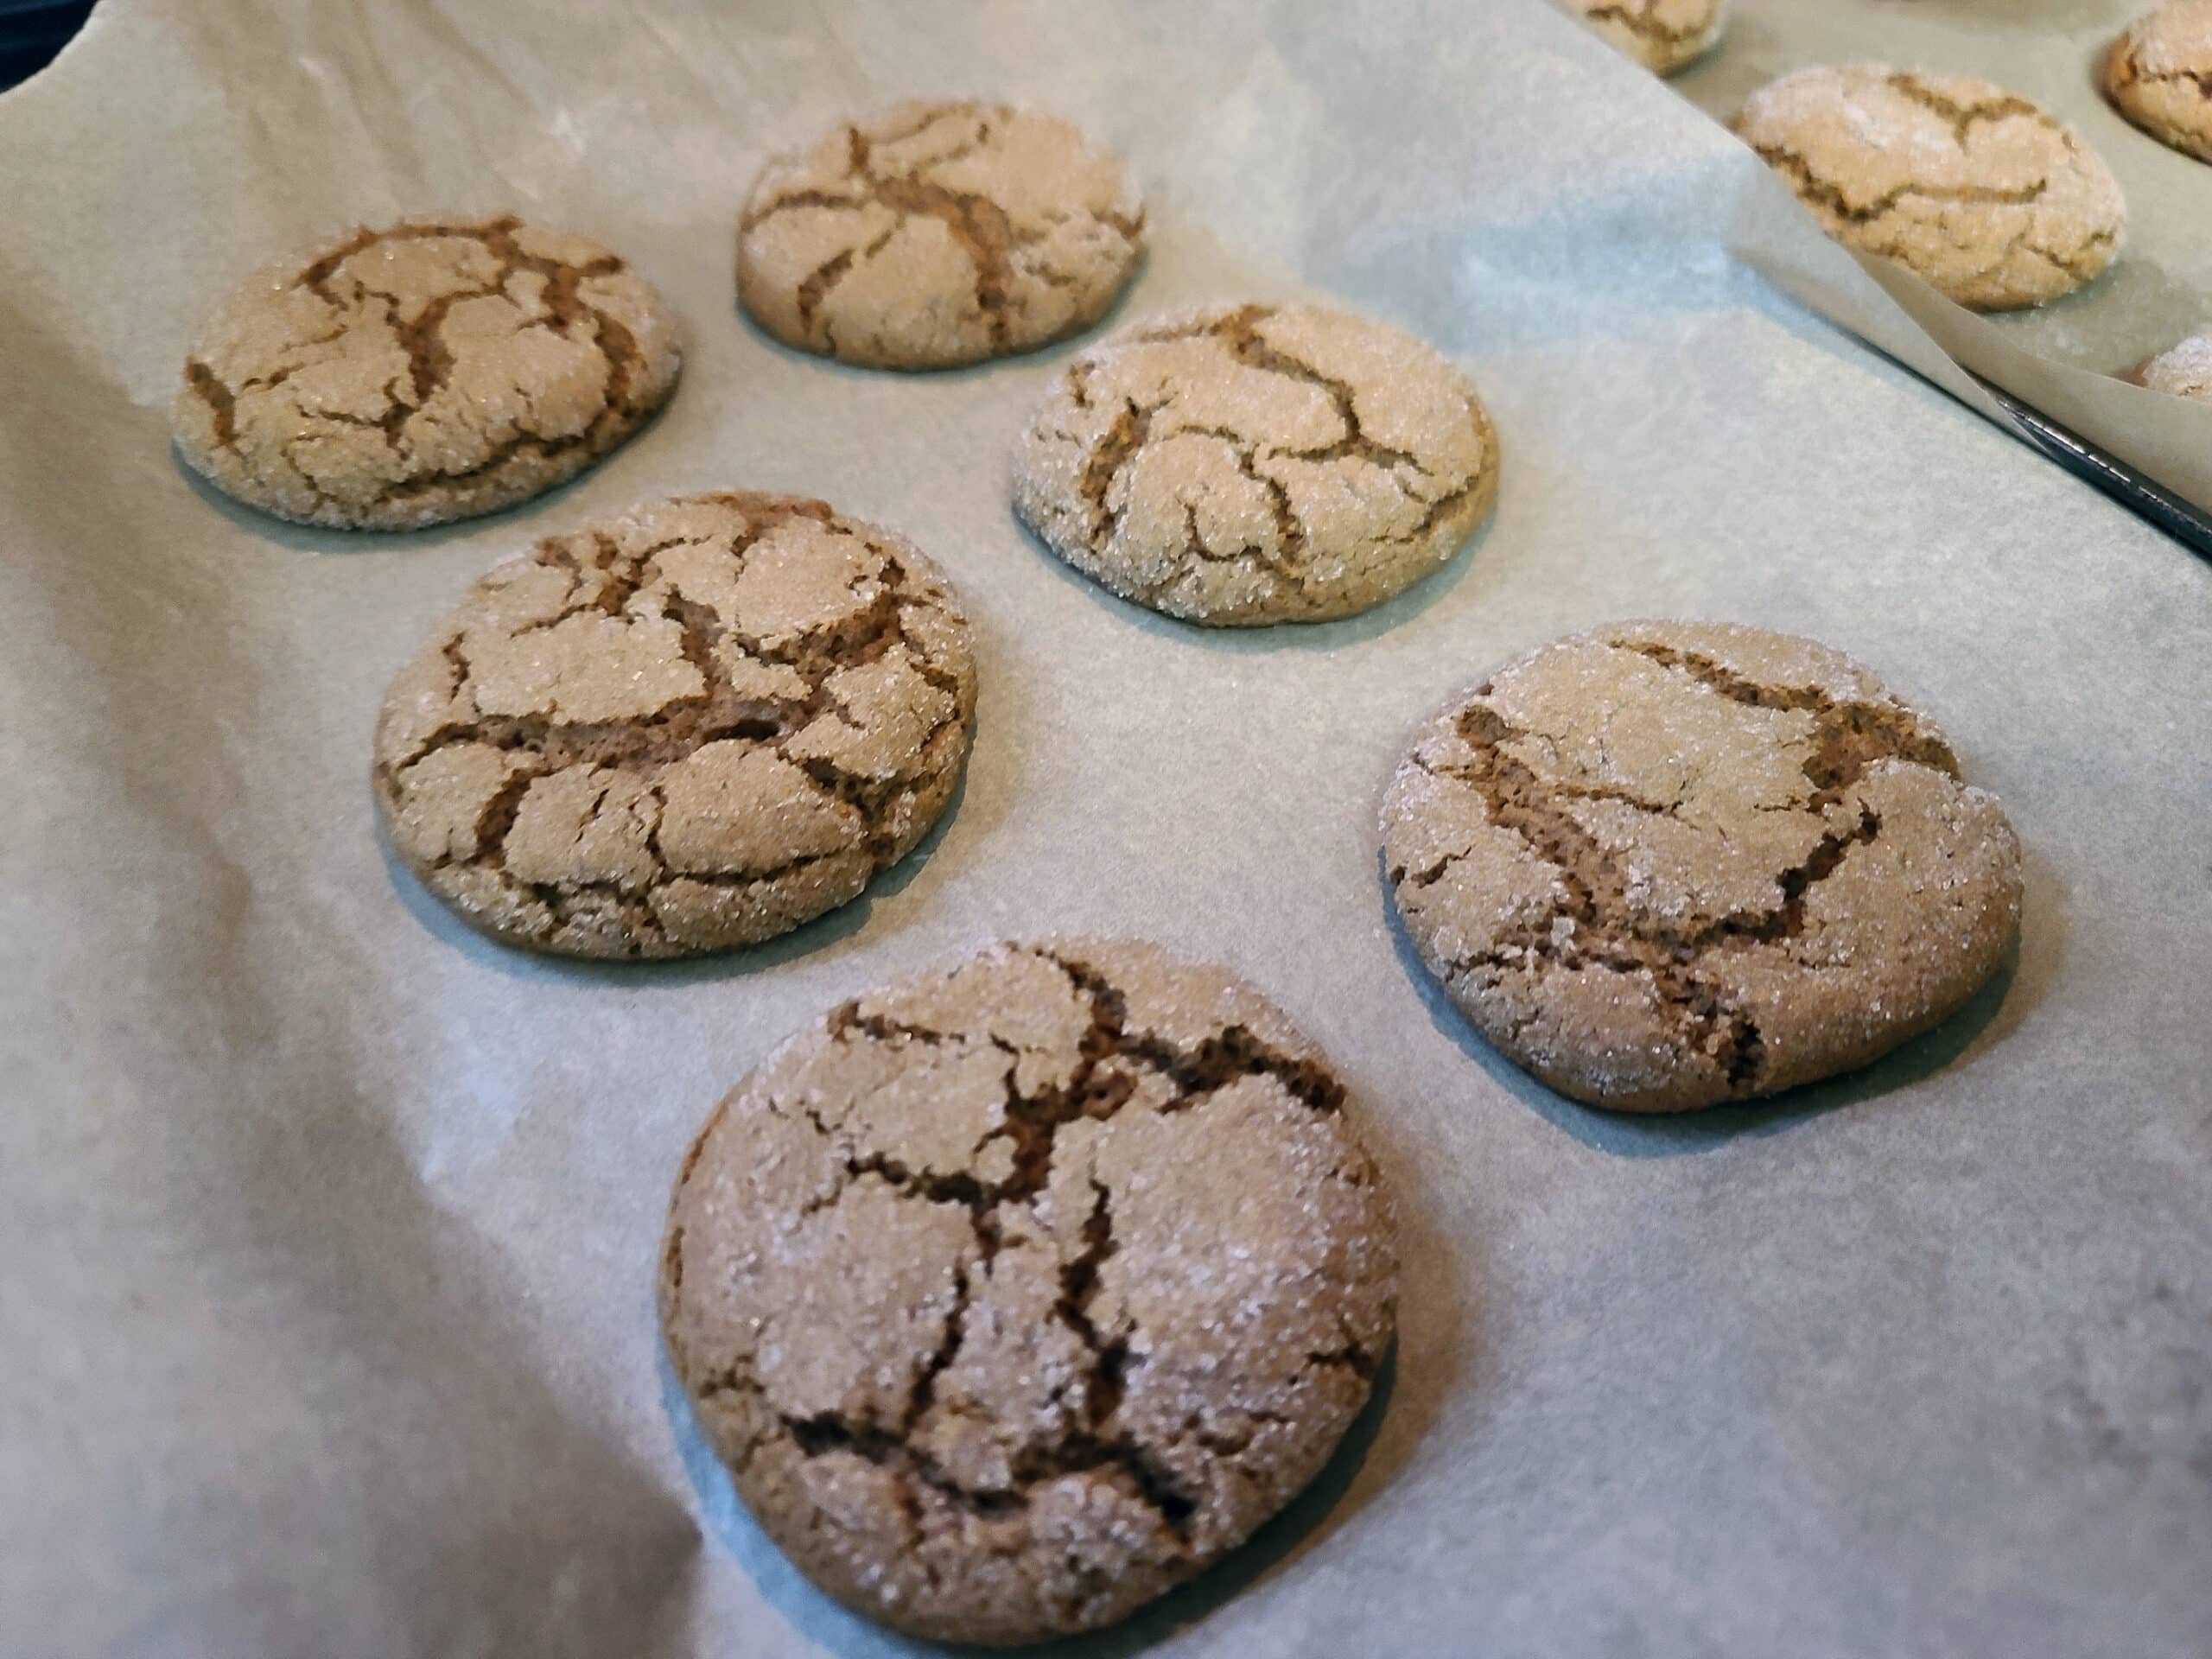 A pan of 6 freshly baked gluten-free ginger molasses cookies.